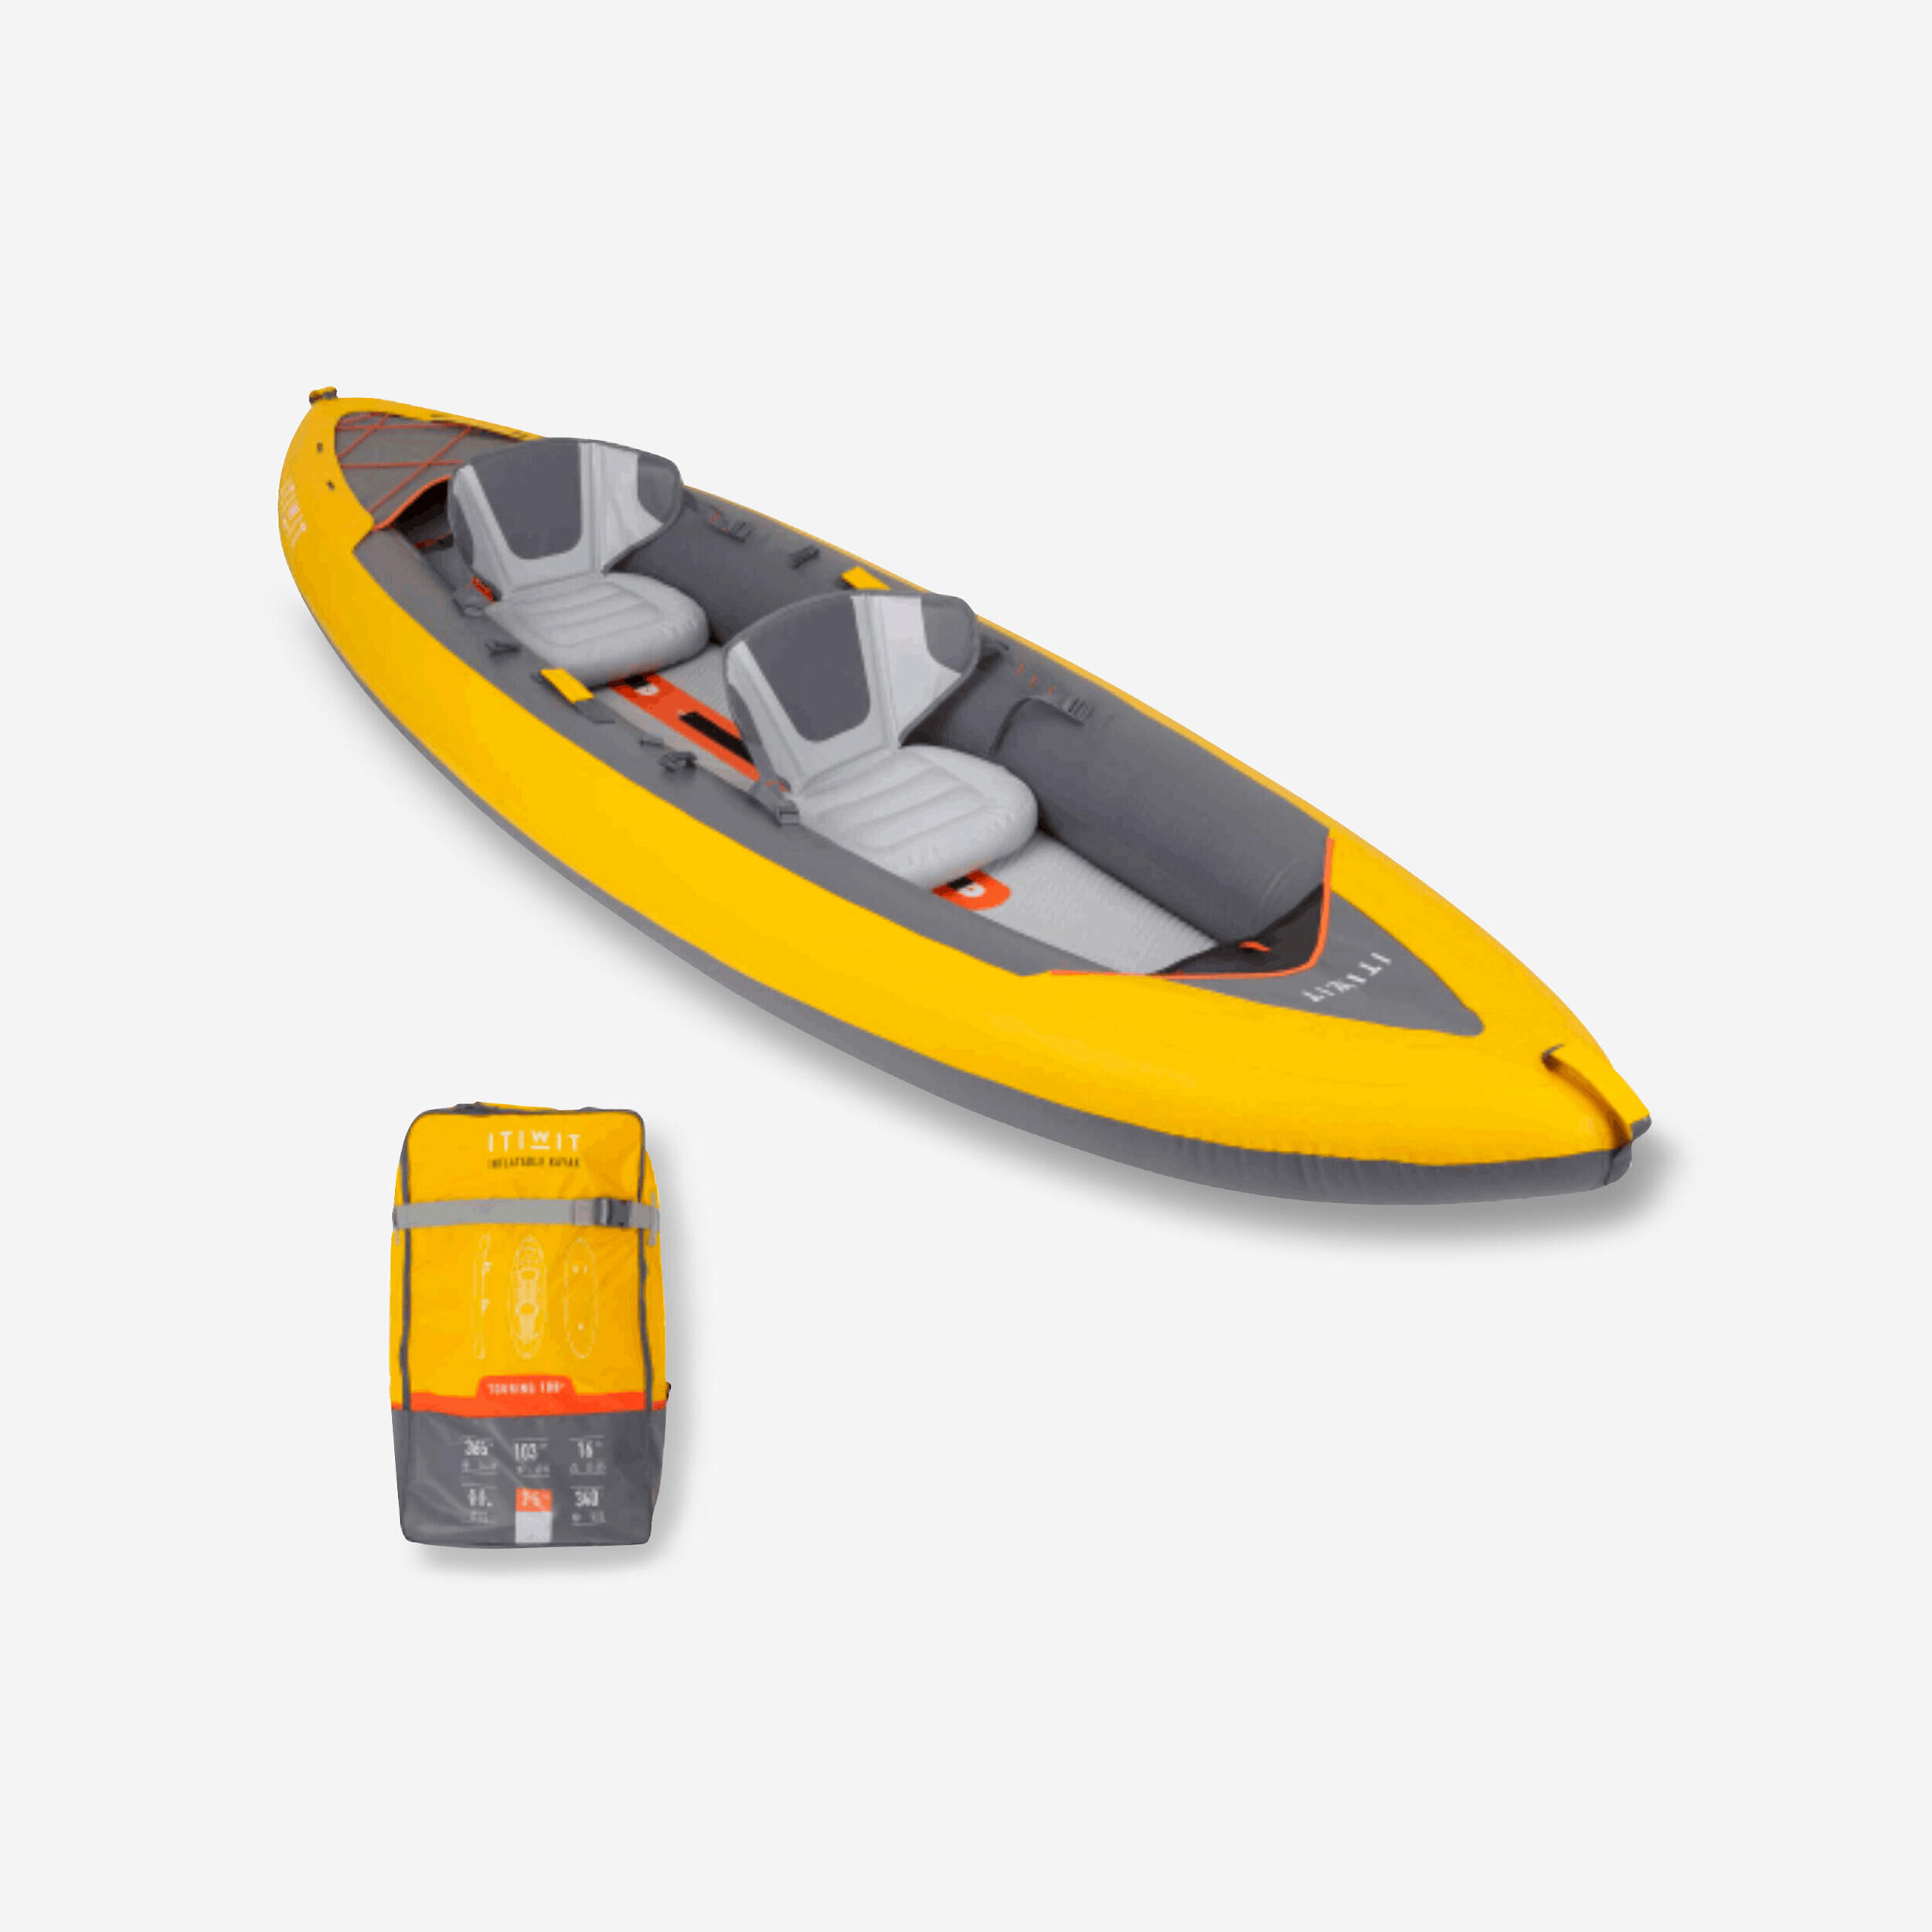 ITIWIT Inflatable 2 person touring Kayak High Pressure Bottom - X100+